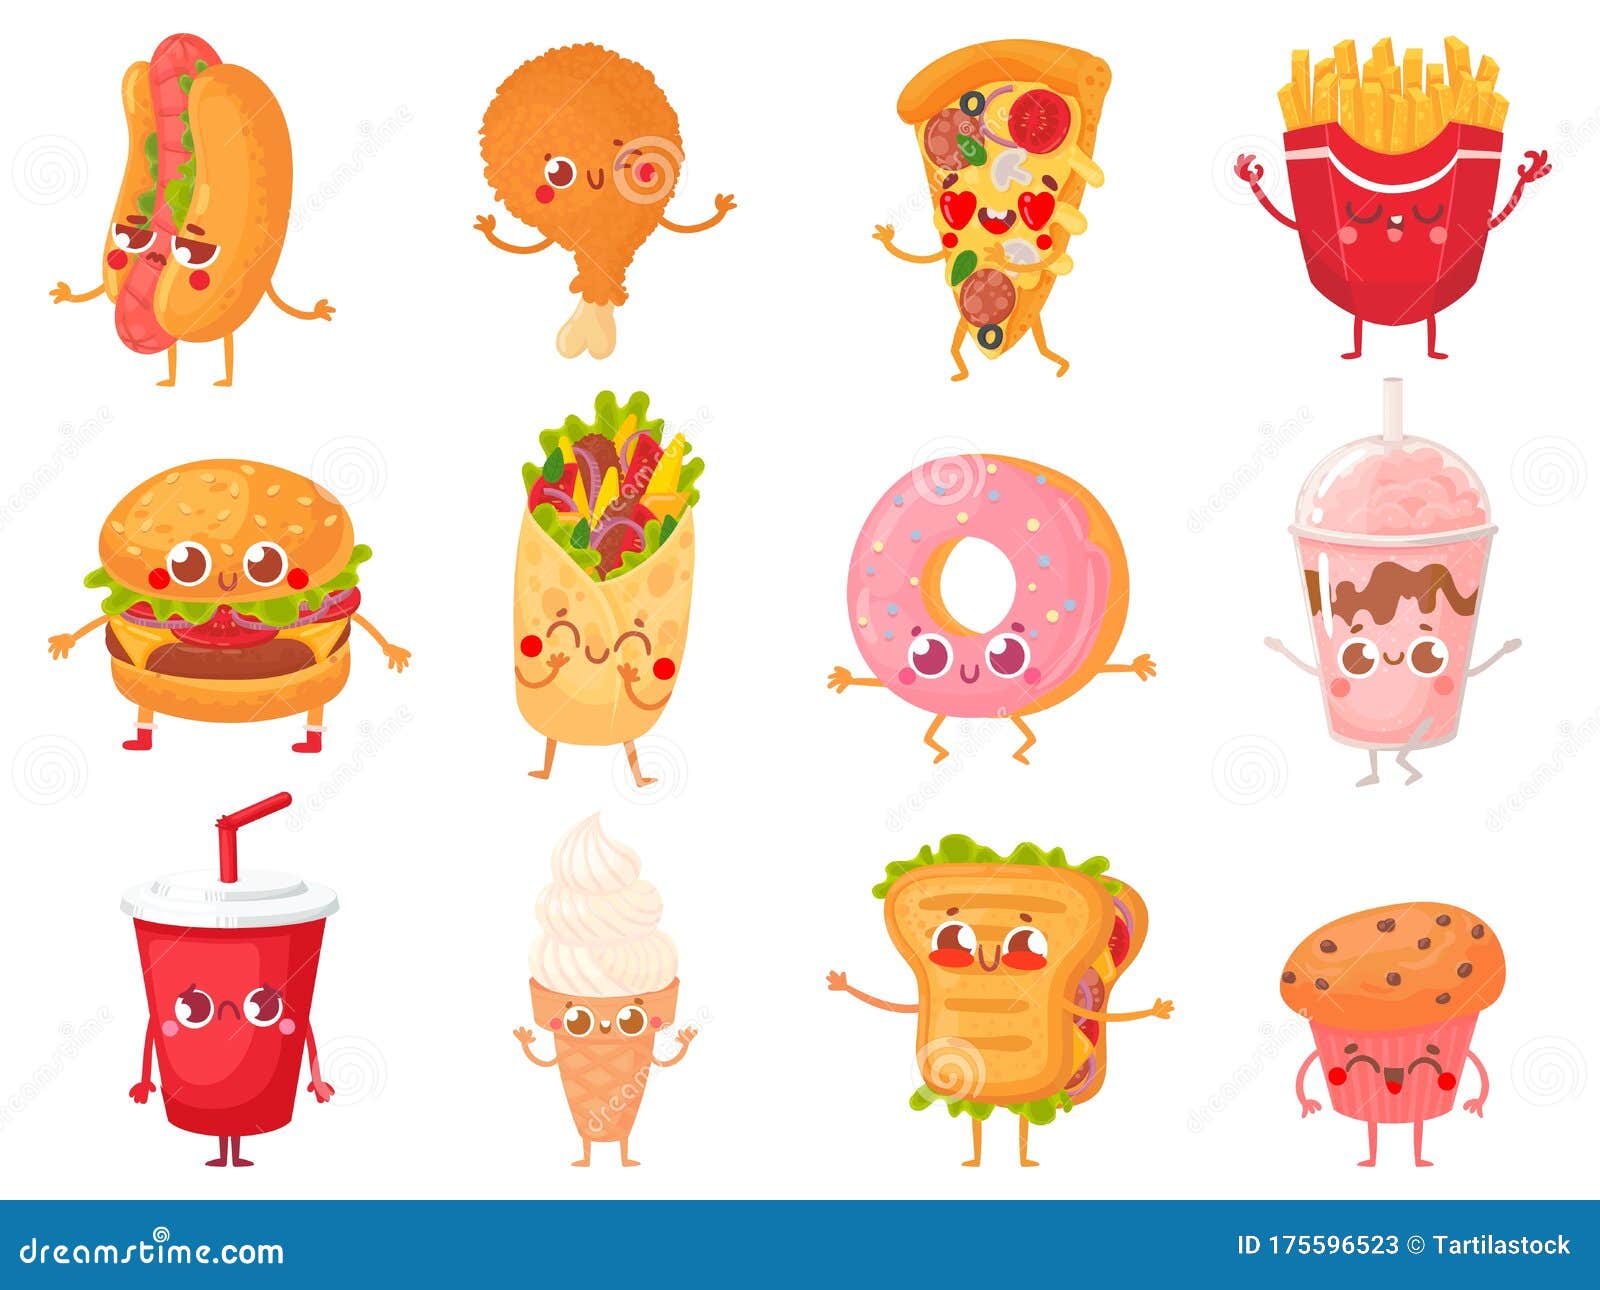 Cartoon Fast Food Mascots. Street Food Character, French Fries and ...